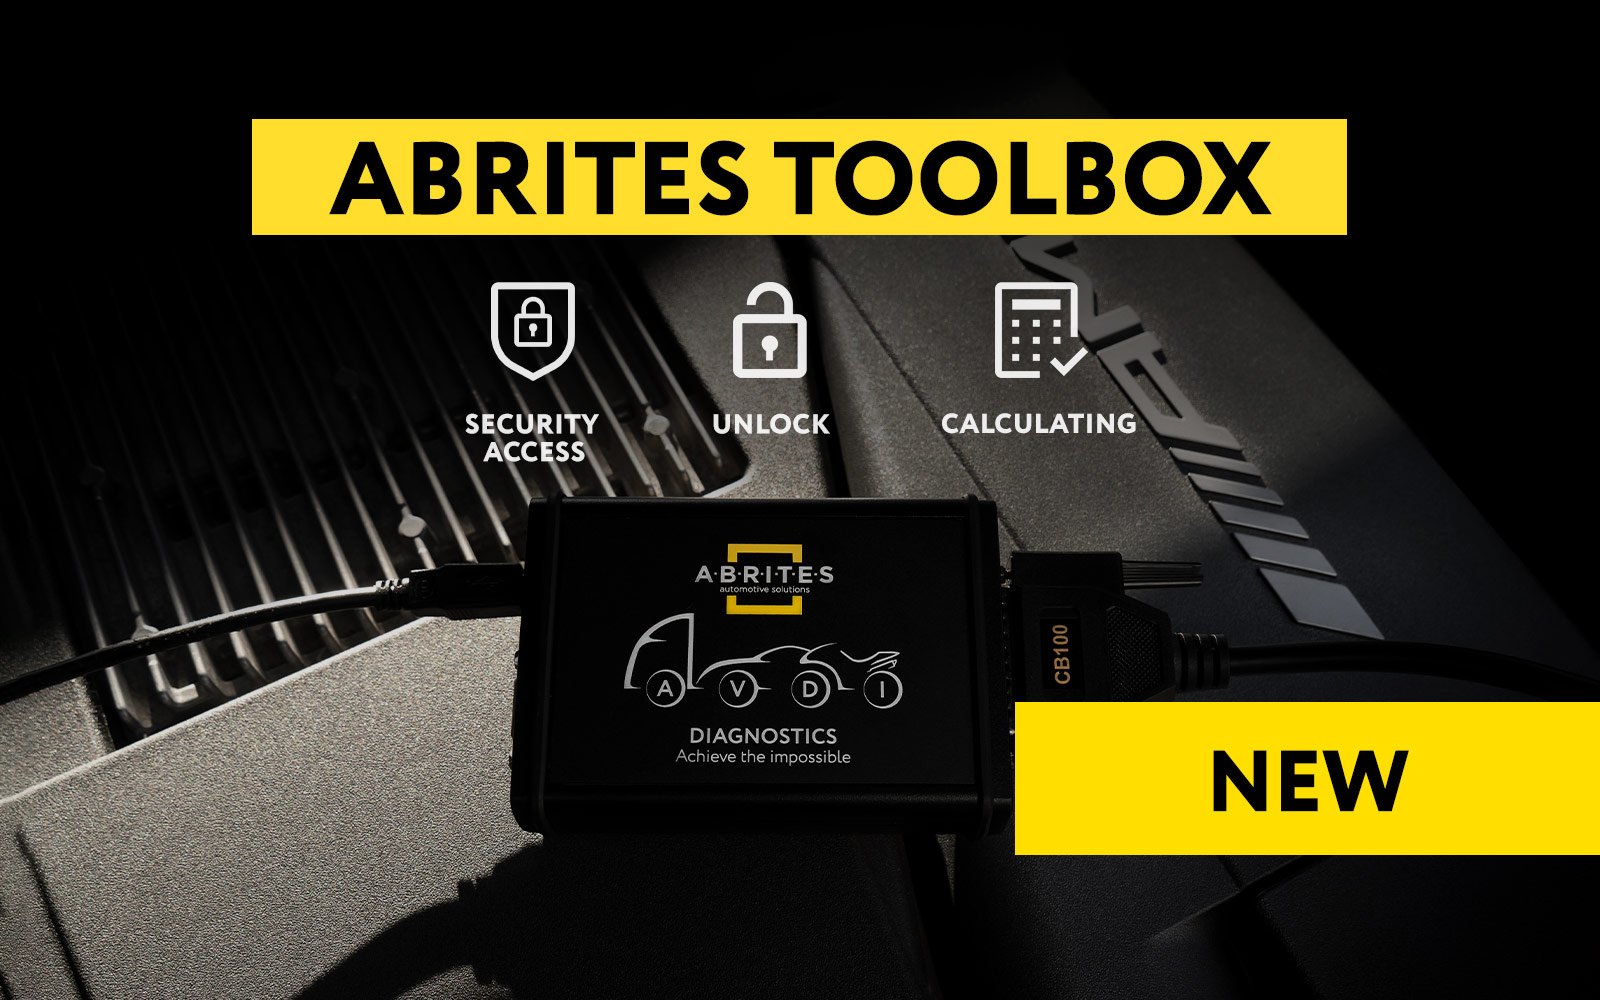 WHAT’S IN YOUR TOOLBOX?